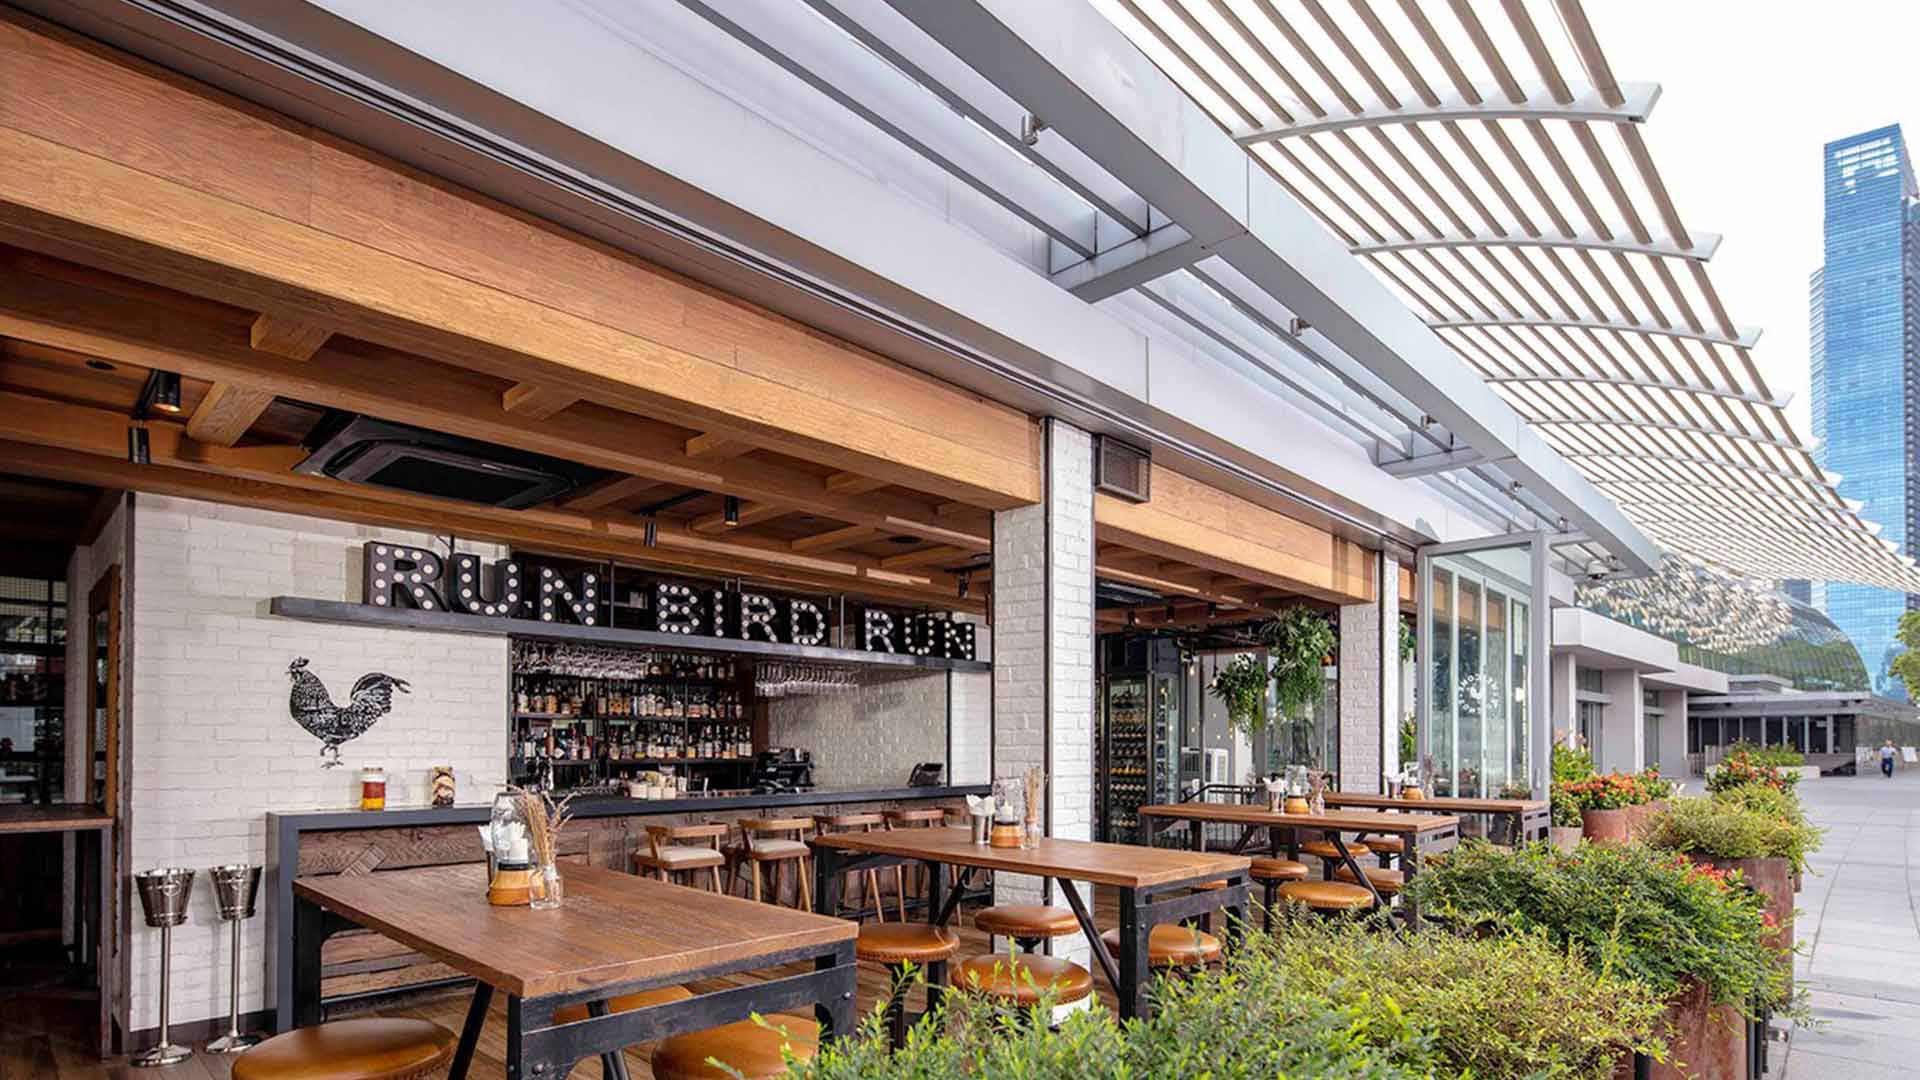 Alfresco dining area at Yardbird, an outdoor setting for private dining and events in Singapore